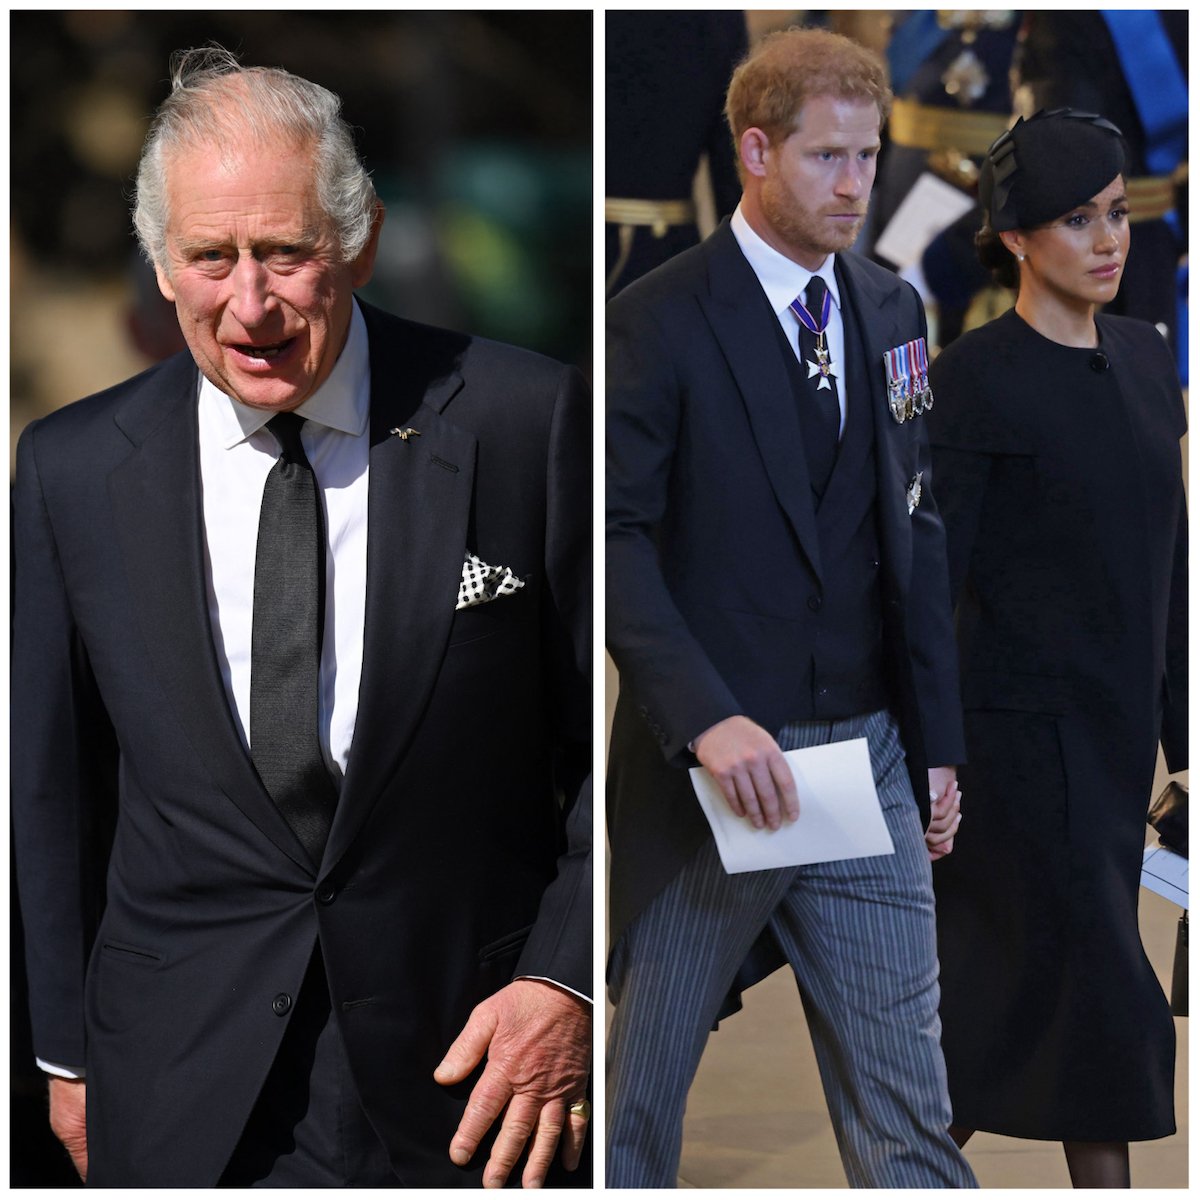 King Charles, who may show his 'ruthless side' if Prince Harry and Meghan Markle trash the monarchy, according to Katie Nicholl, in Oct. 2022; Prince Harry and Meghan Markle in Sept. 2022